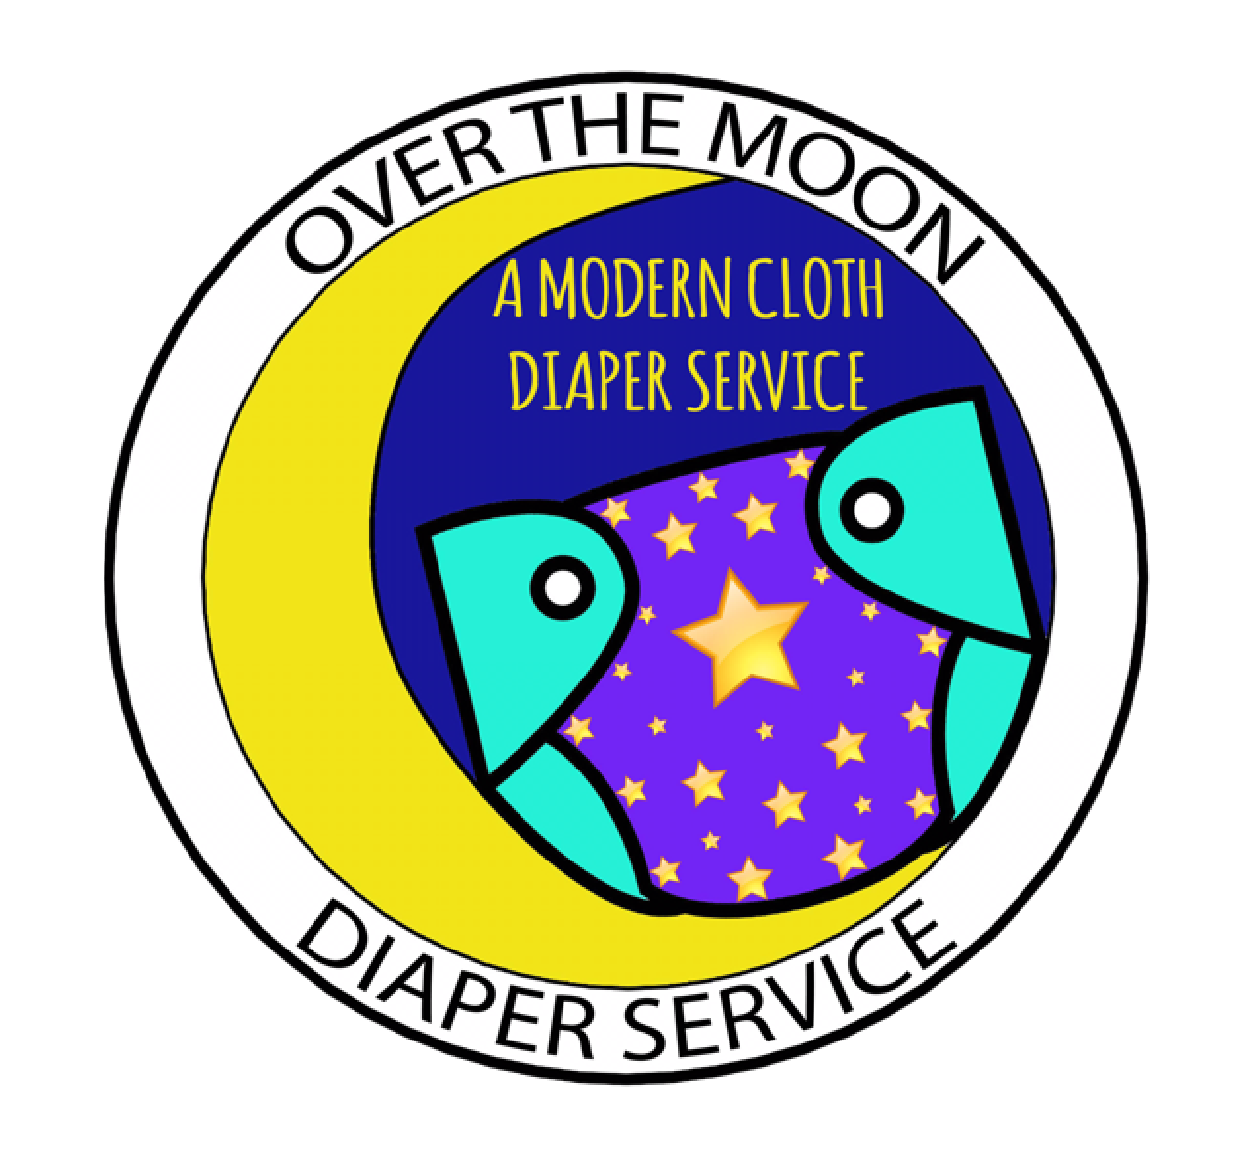 Over the Moon Cloth Diaper Service